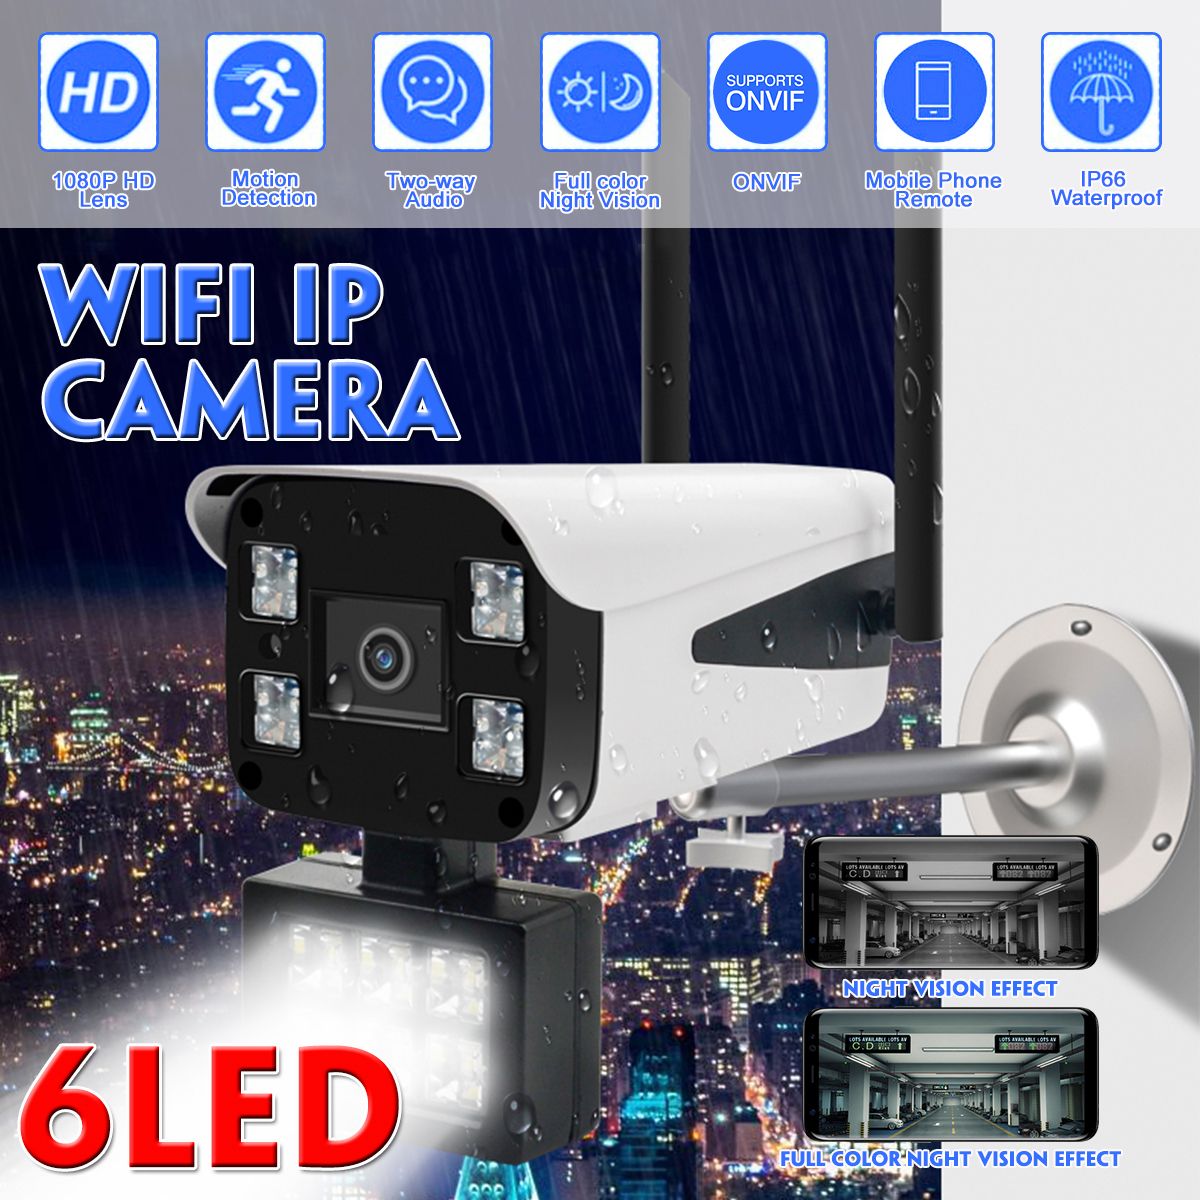 GUUDGO-10LED-1080P-Wireless-Security-IP-Camera-WiFi-Camera-Night-Vision-Full-Color-Outdoor-IP66-Wate-1546404